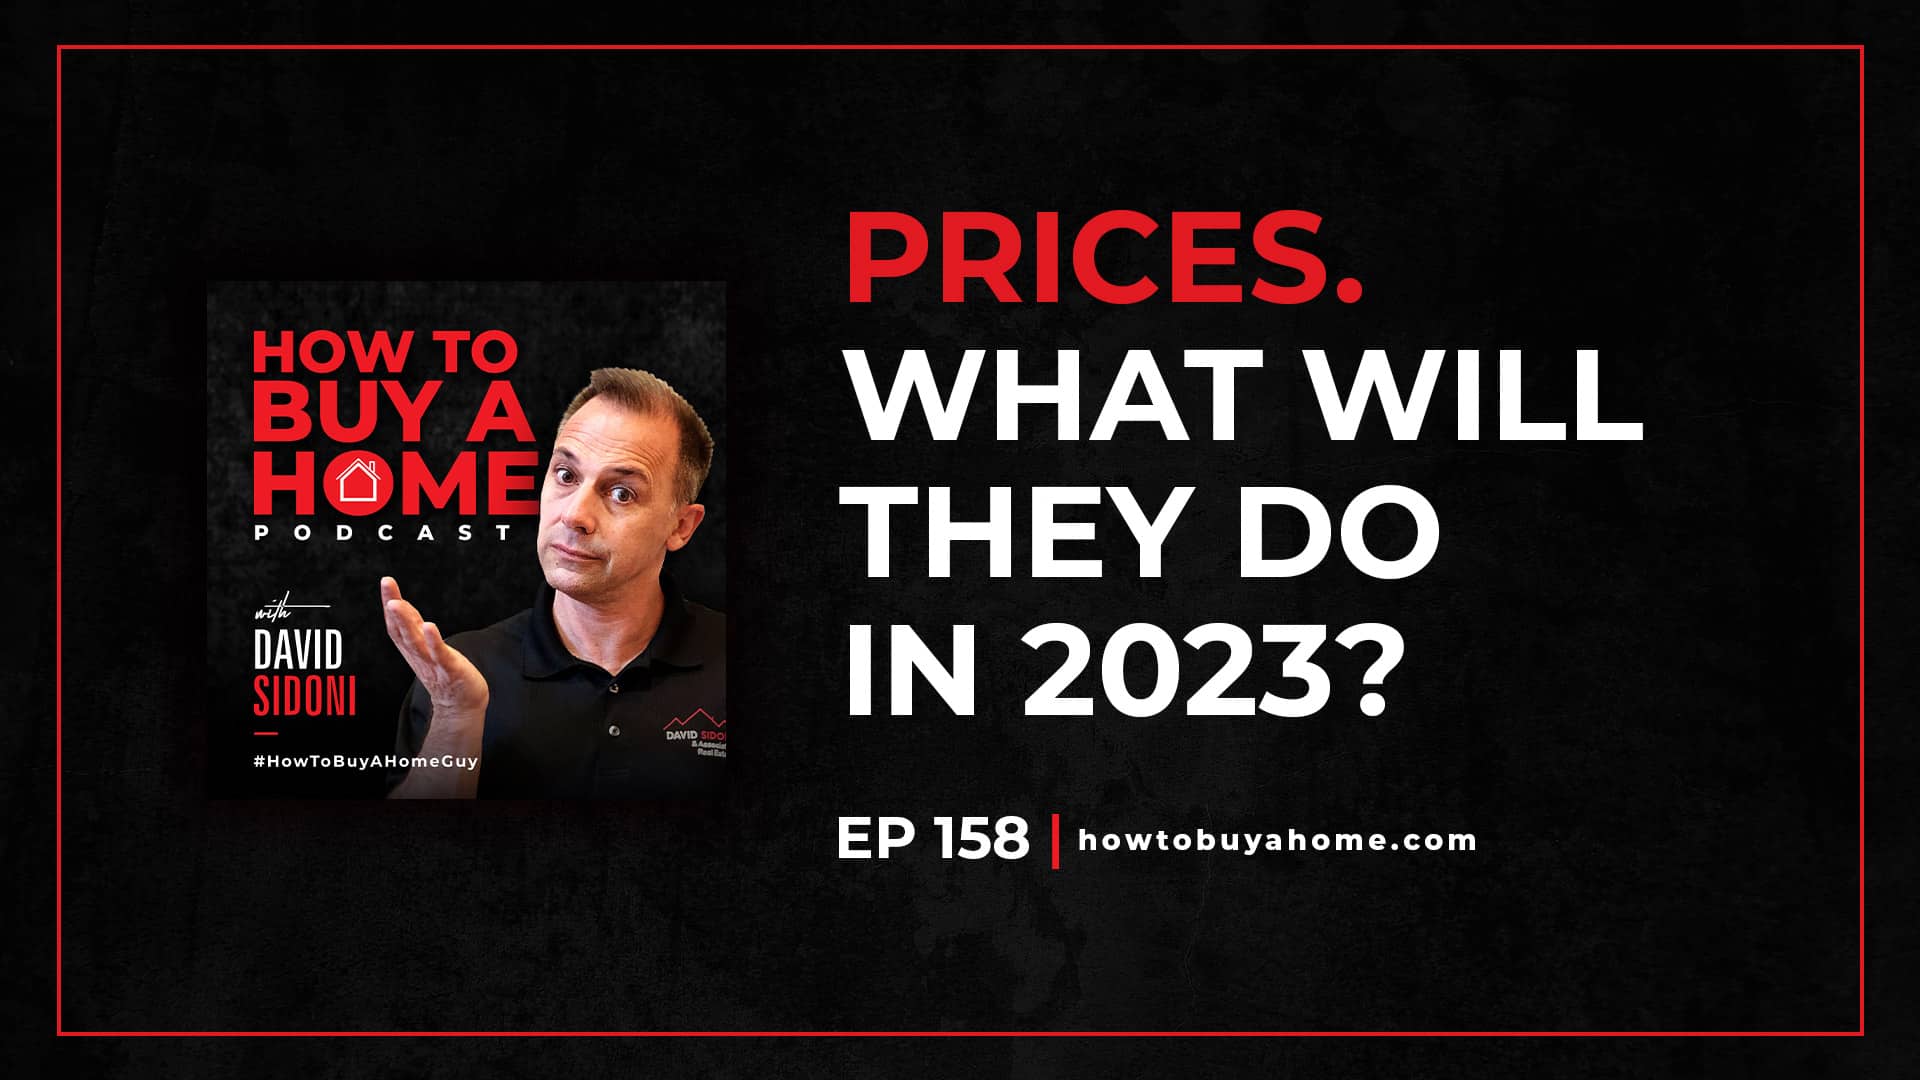 Ep. 158 – PRICES. What Will They Do in 2023